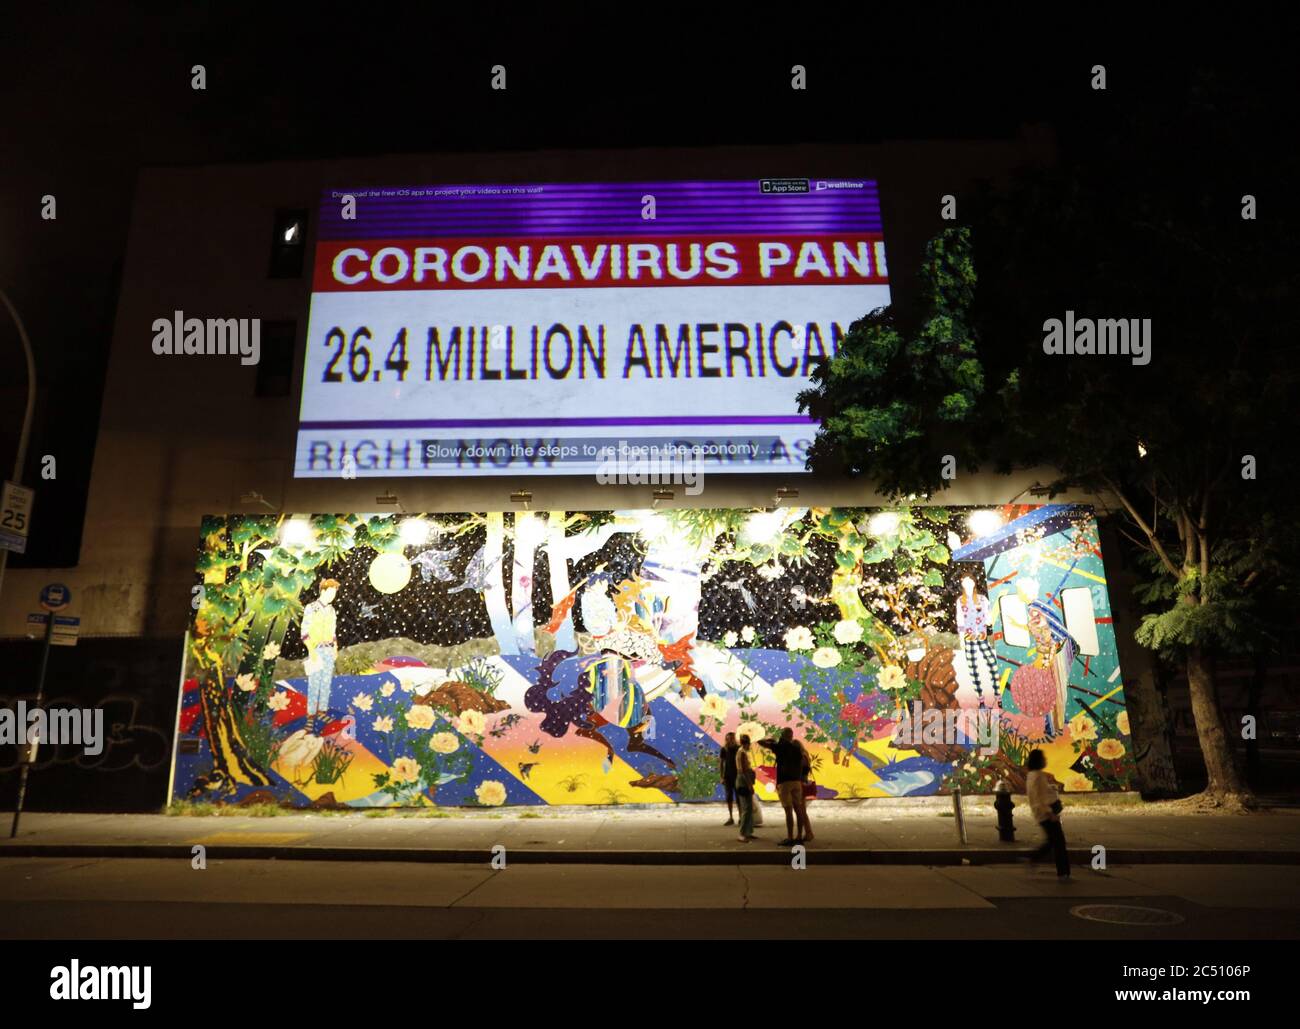 New York, United States. 30th June, 2020. An Anti-Trump ad related to the Coronavirus pandemic appears above the Bowery Mural on Bowery Street in New York City on Monday, June 29, 2020. Bowery Mural is an expansive outdoor wall showcasing creative, contemporary murals that change regularly. Photo by John Angelillo/UPI Credit: UPI/Alamy Live News Stock Photo